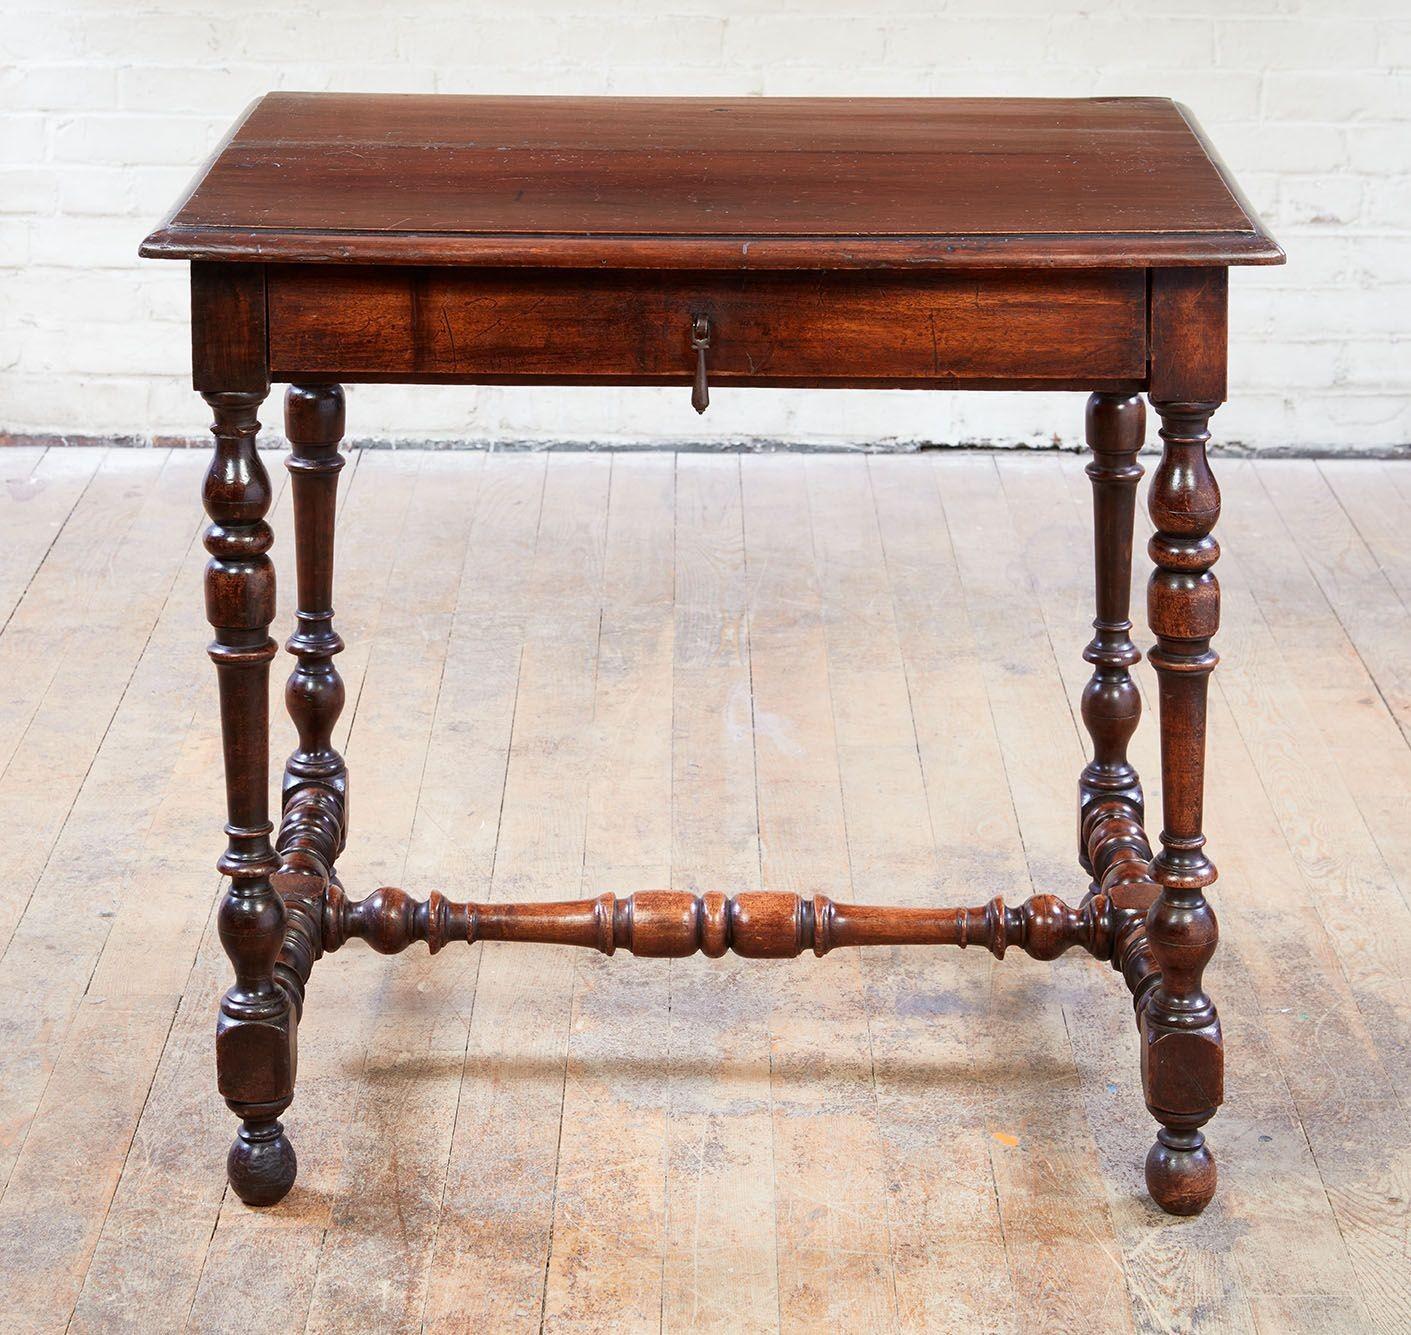 A Flemish Baroque side table in walnut with molded two plank top over single drawer with center drop pull and standing on turned legs joined by conforming turned H-shaped stretcher. Flemish or French 18th century.